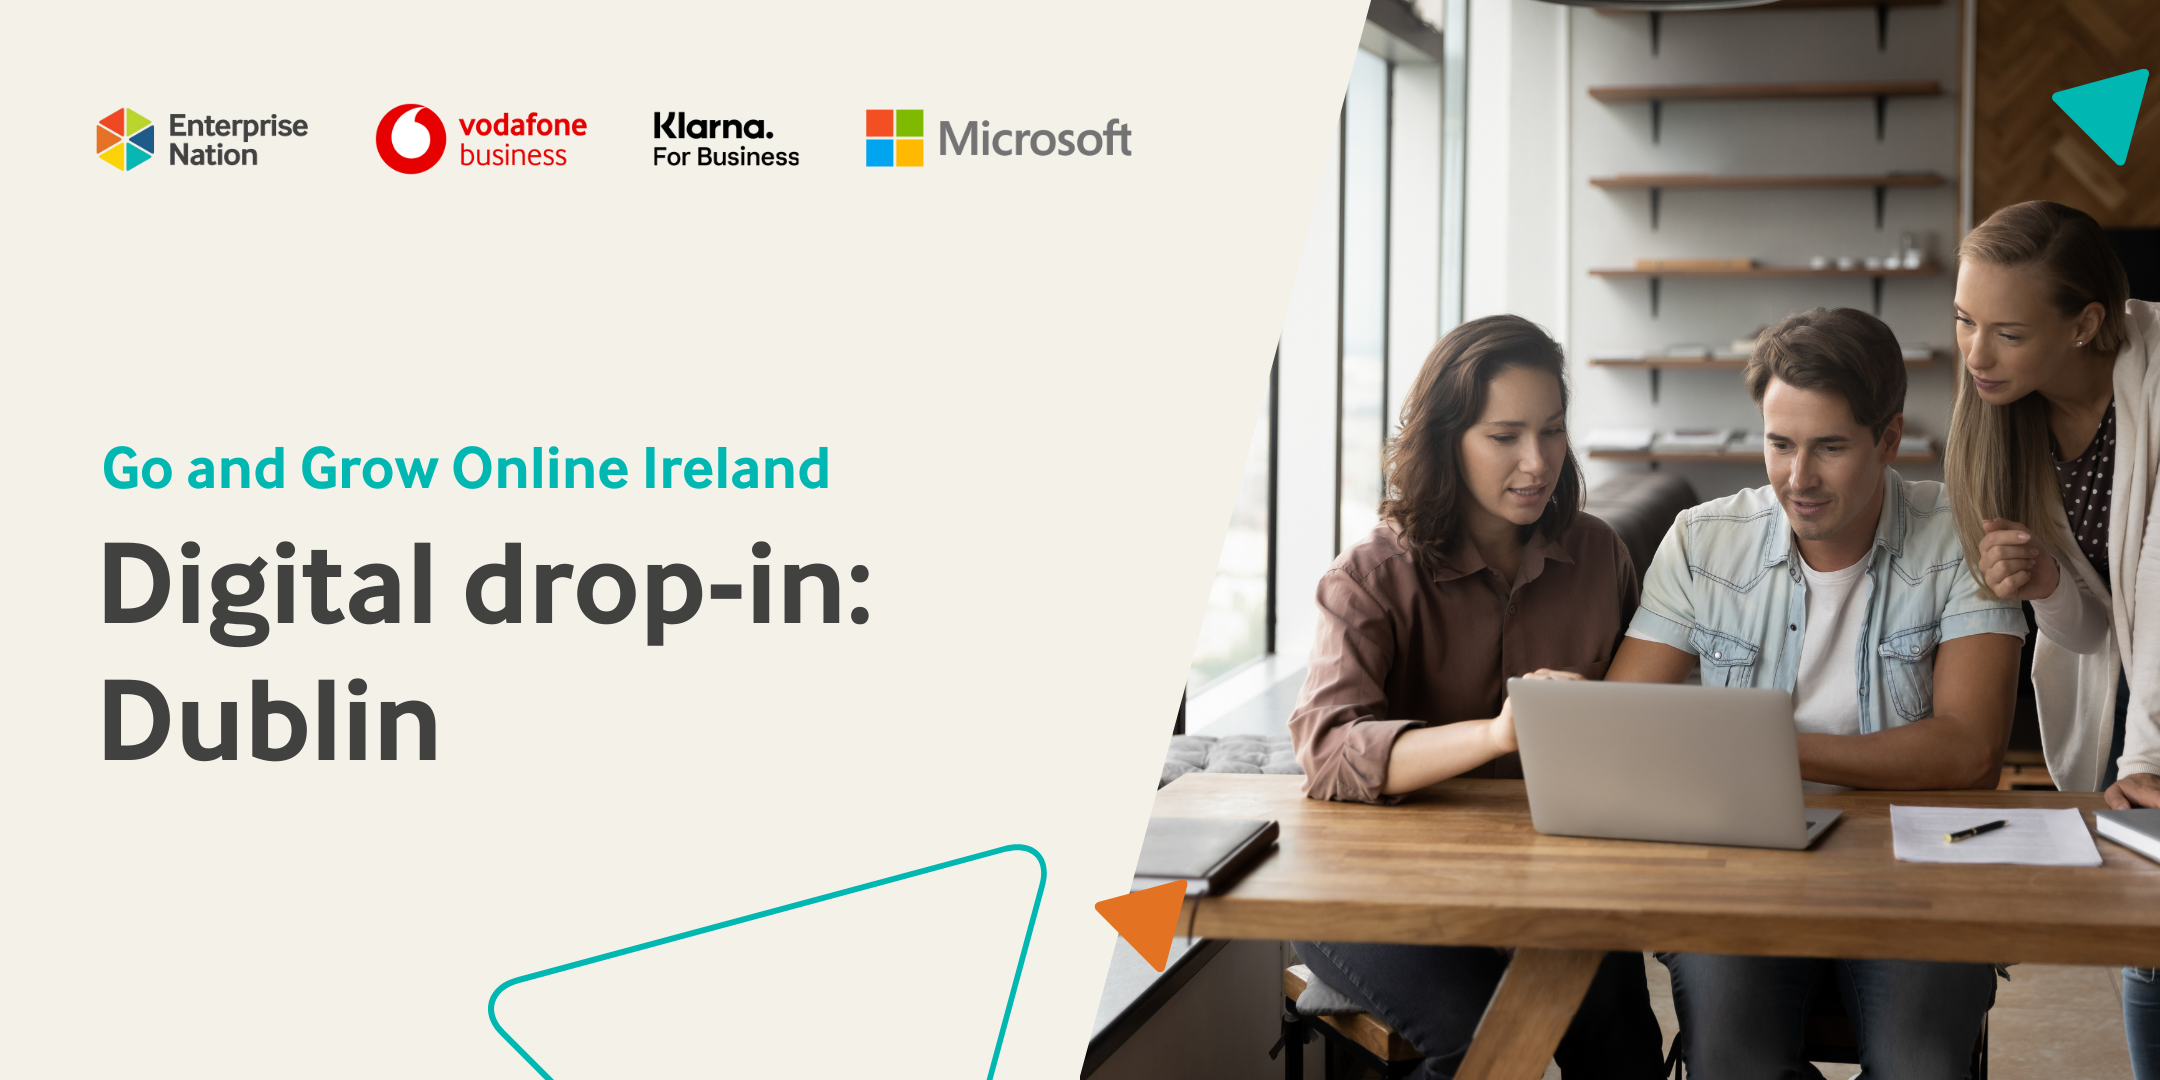 Go and Grow Online: An in-person digital drop-in event for small businesses – Dublin